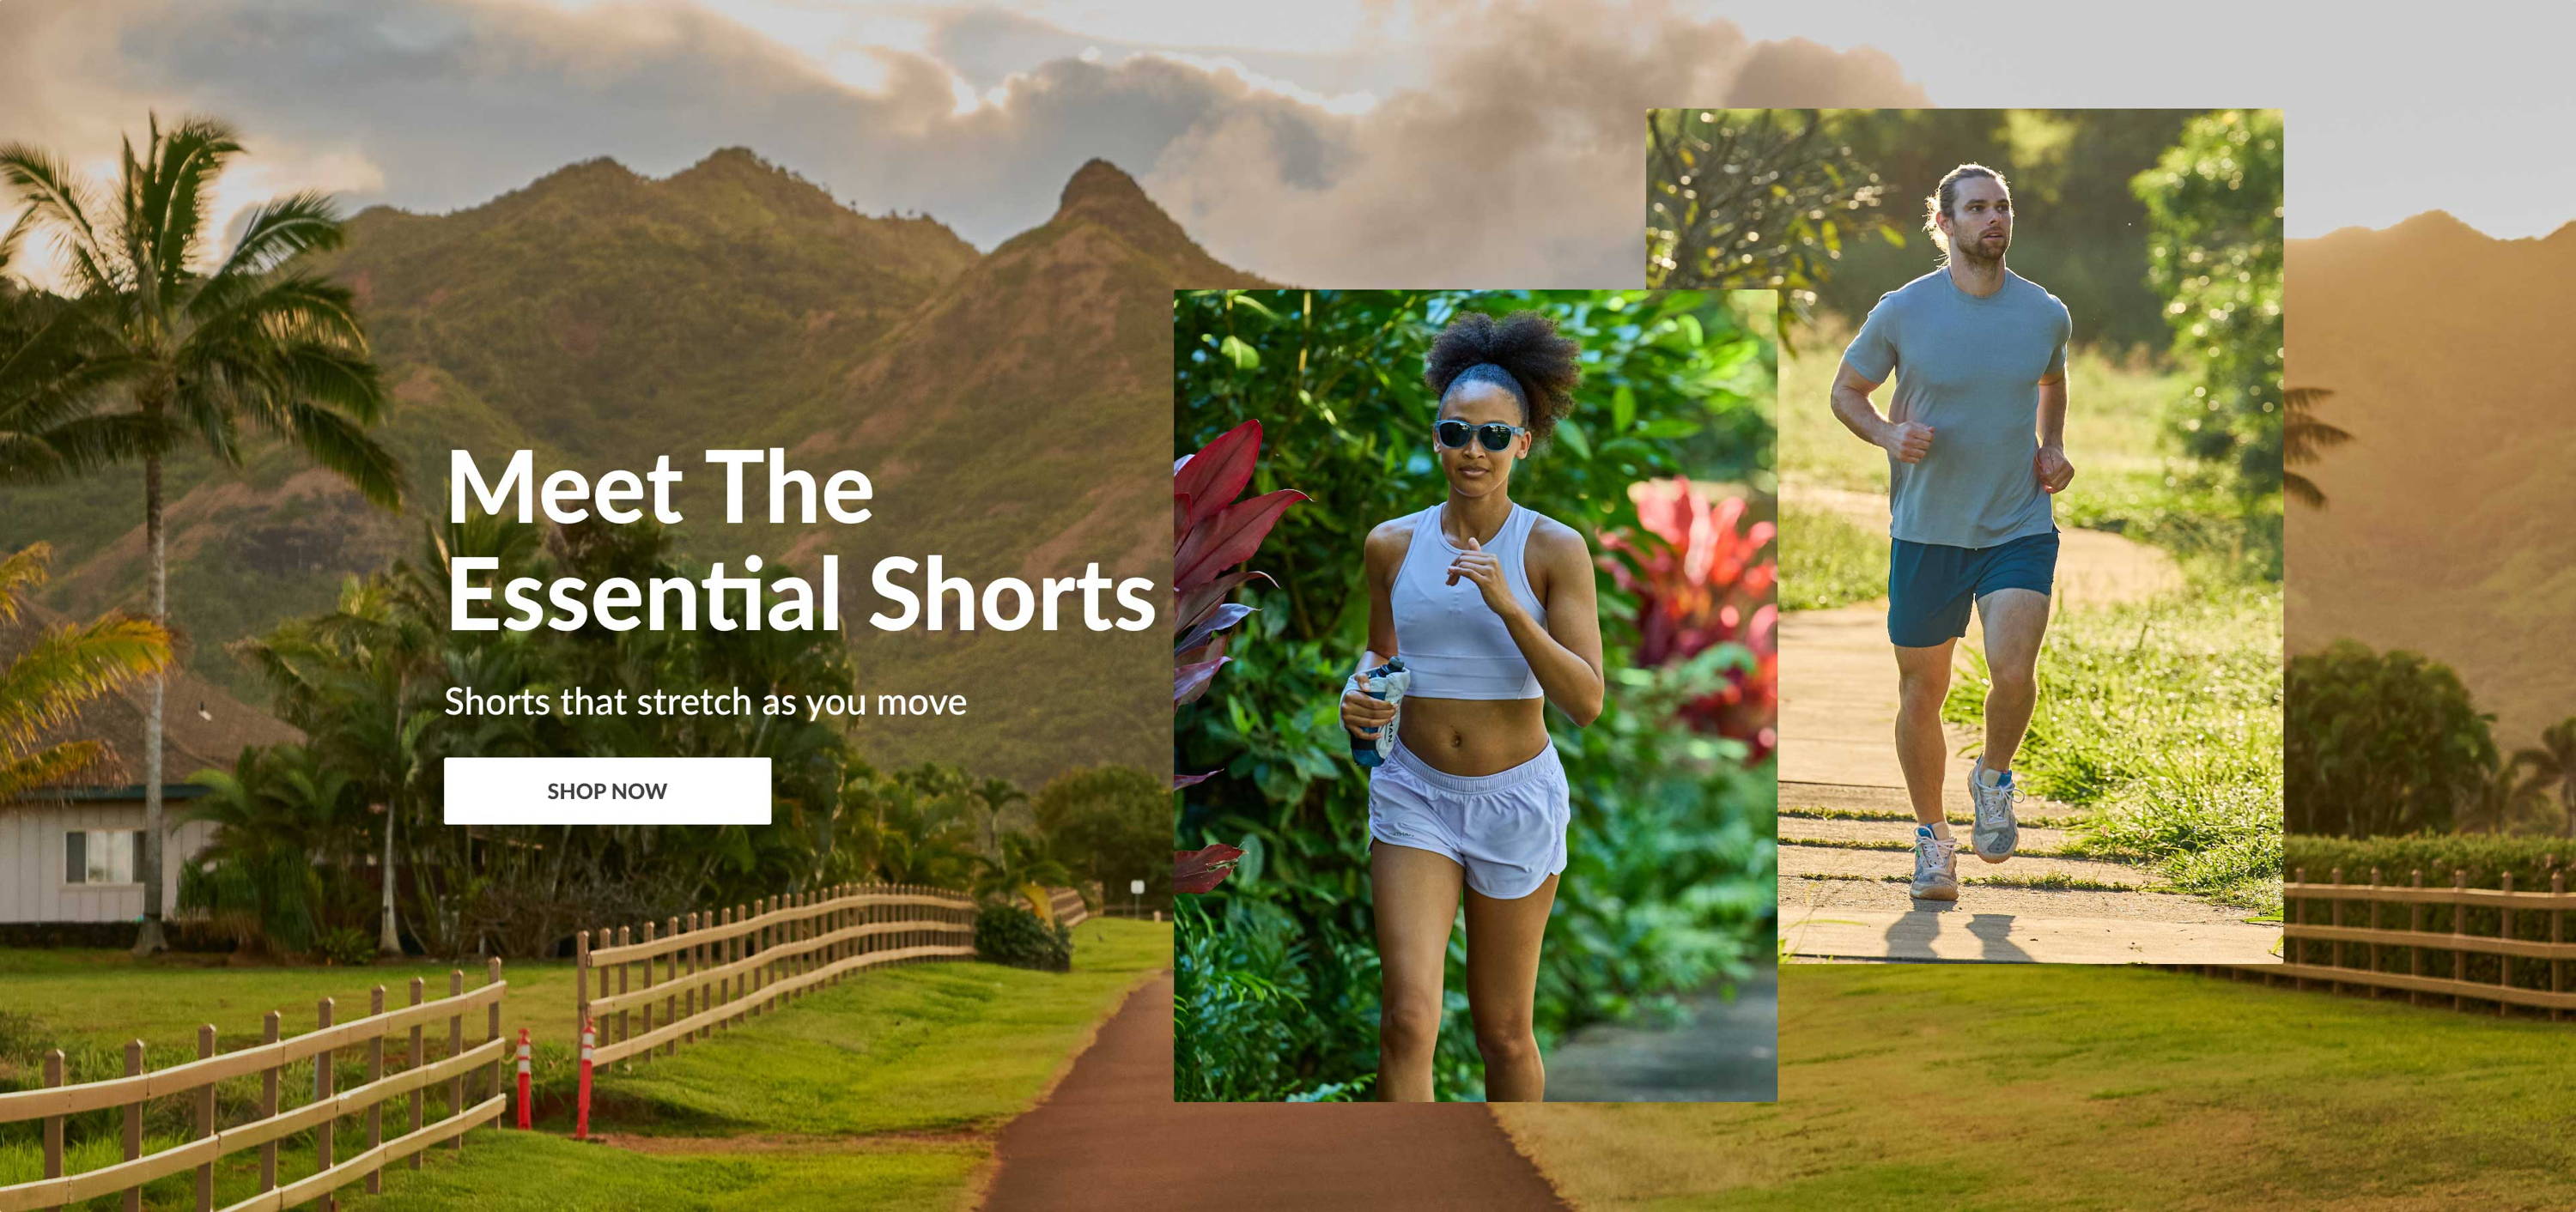 Meet The Essential Shorts - Shorts That Stretch As You Move - SHOP NOW